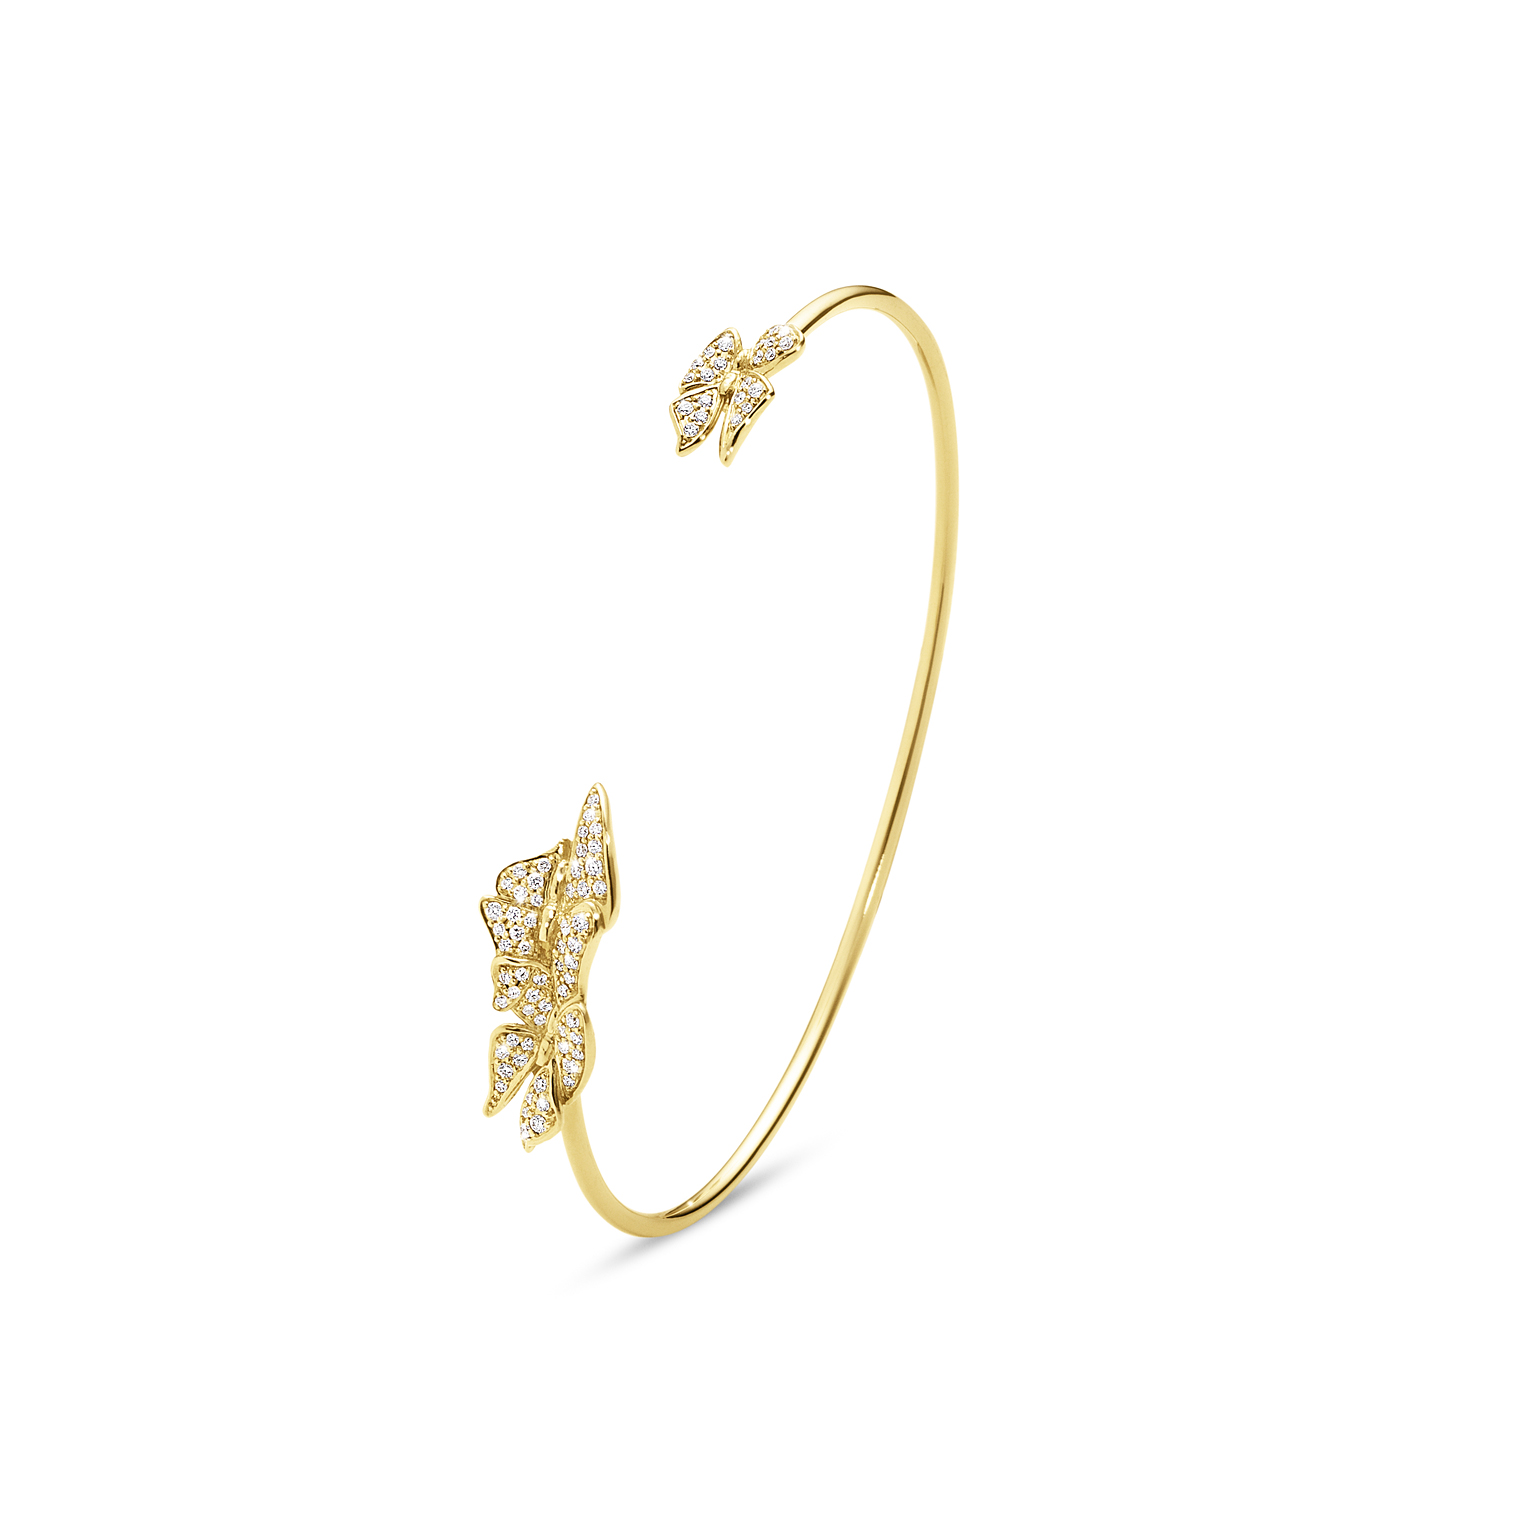   The Askill Collection for Georg Jensen  Butterfly bangle in 18K gold and diamonds.&nbsp; 